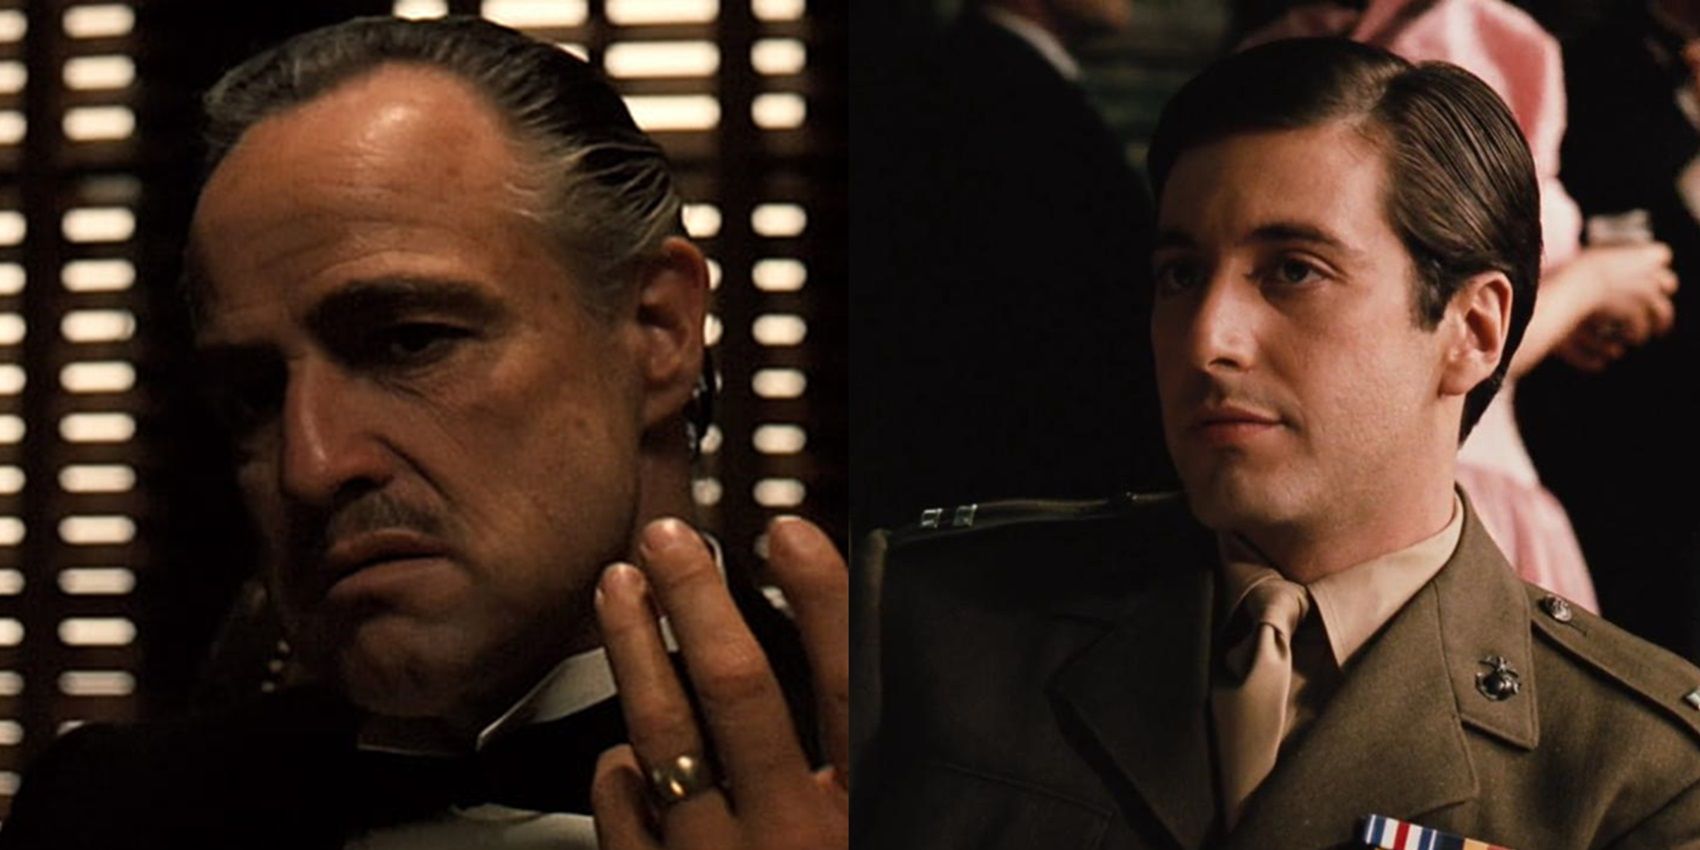 A split image of characters from the Godfather movie trilogy.